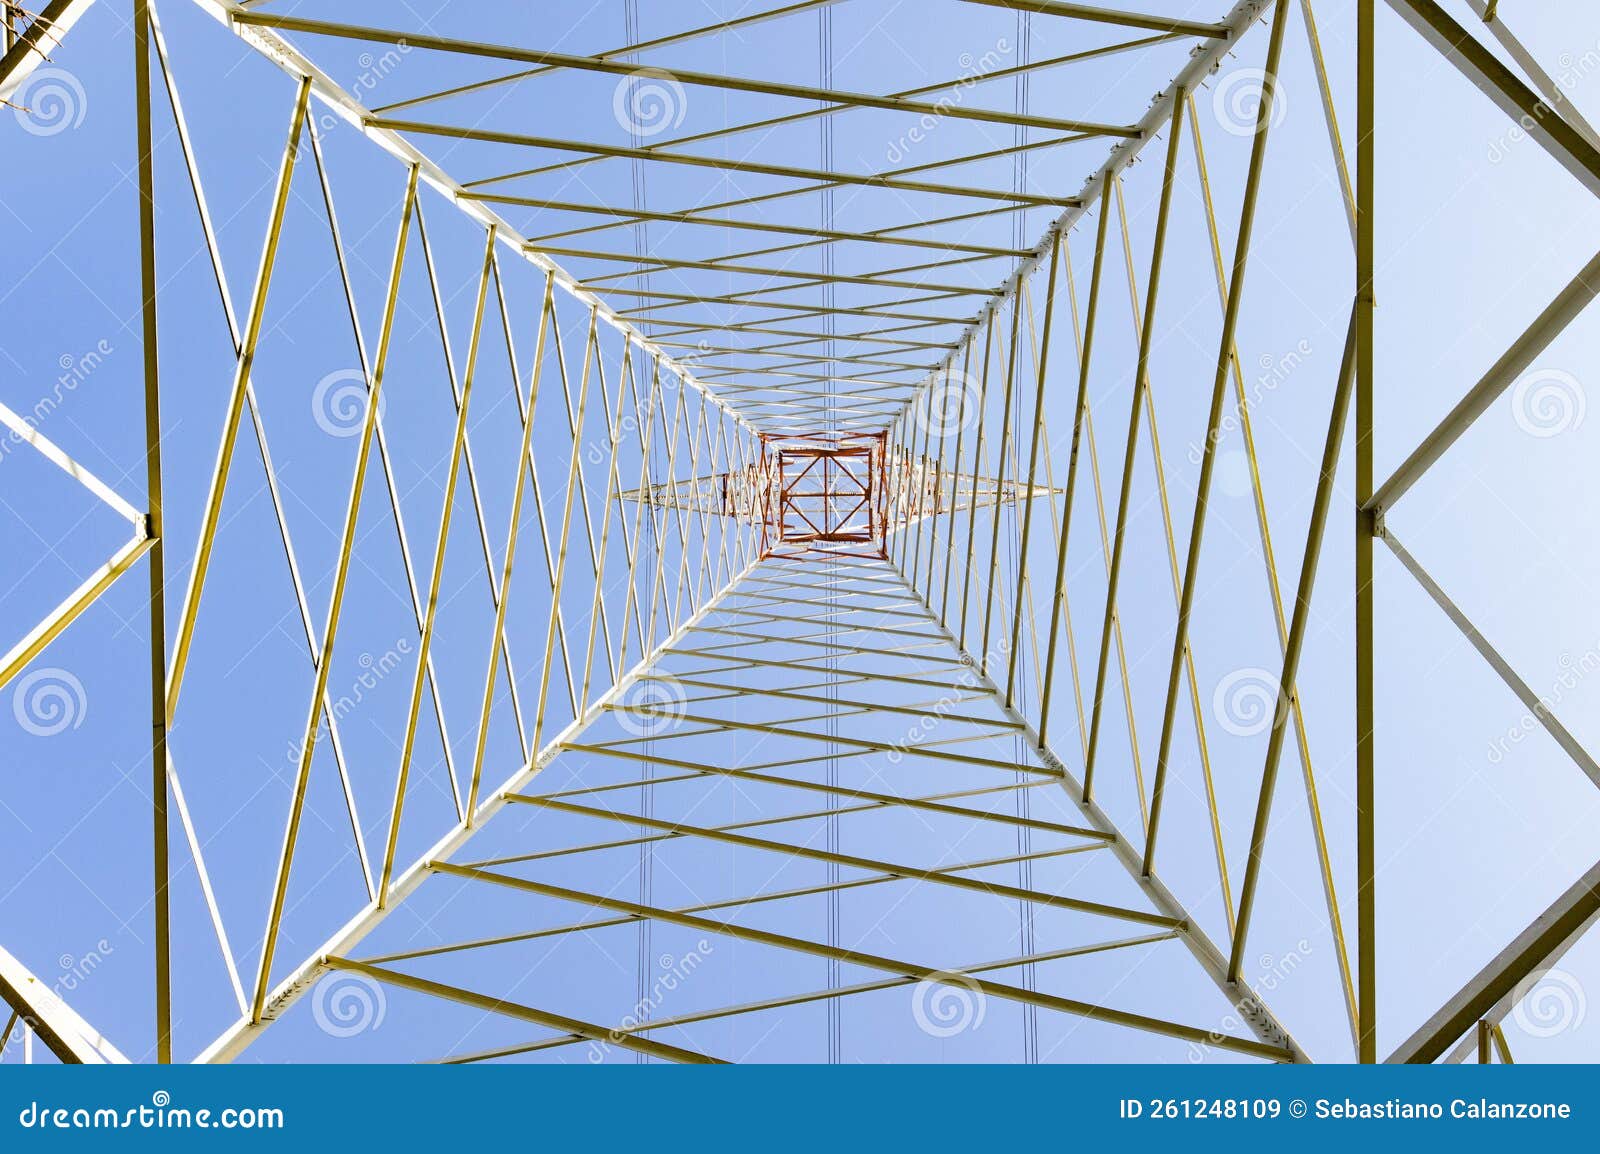 electricity pylon in perspective seen from below with blue sky background